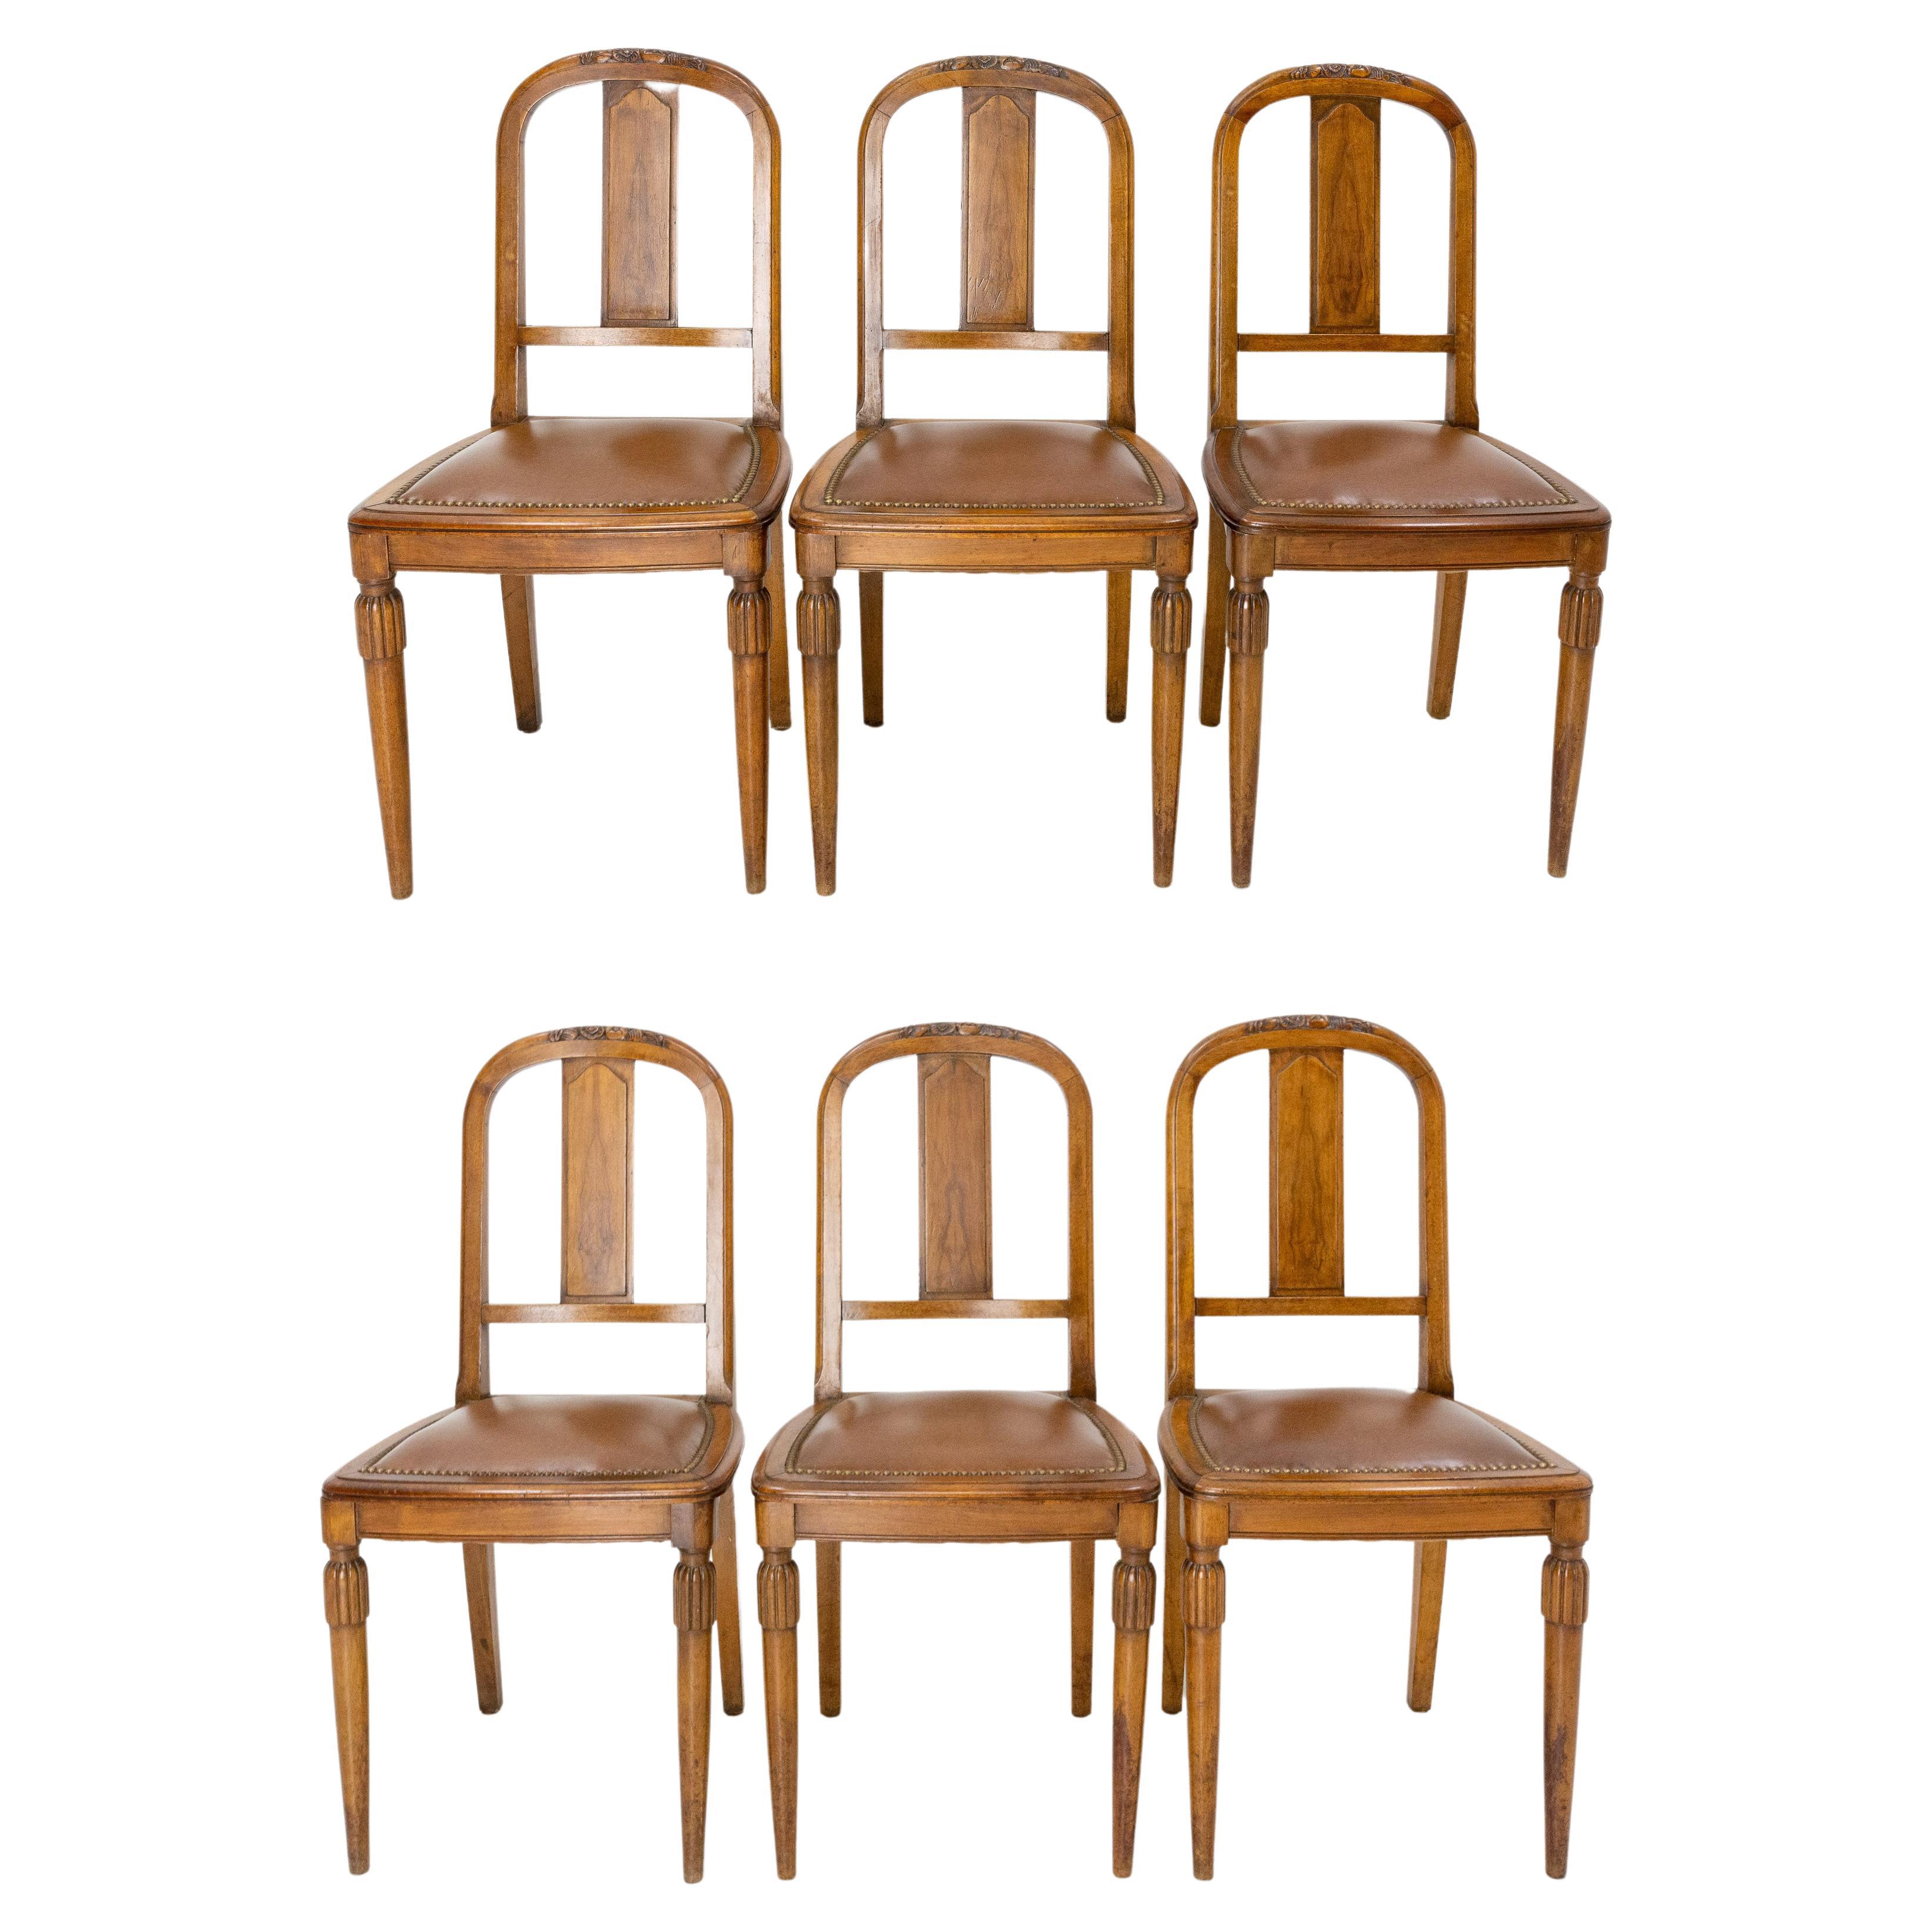 Six Art Deco Dining Walnut and Skai Chairs, French, circa 1930 For Sale